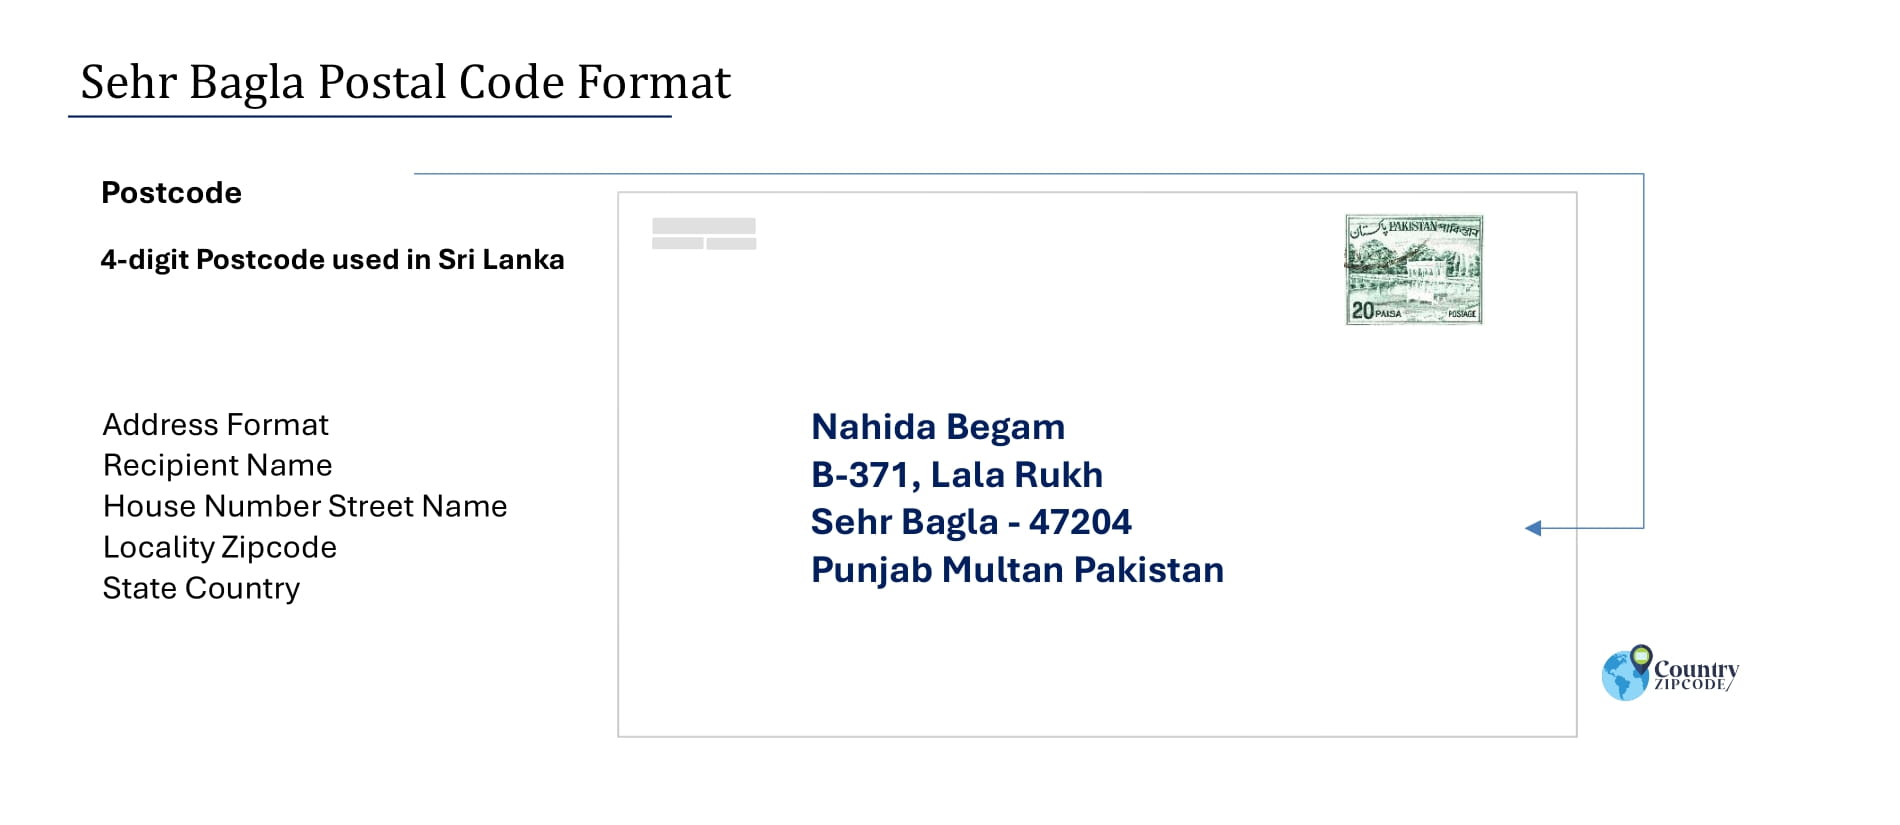 Example of Sehr Bagla Pakistan Postal code and Address format